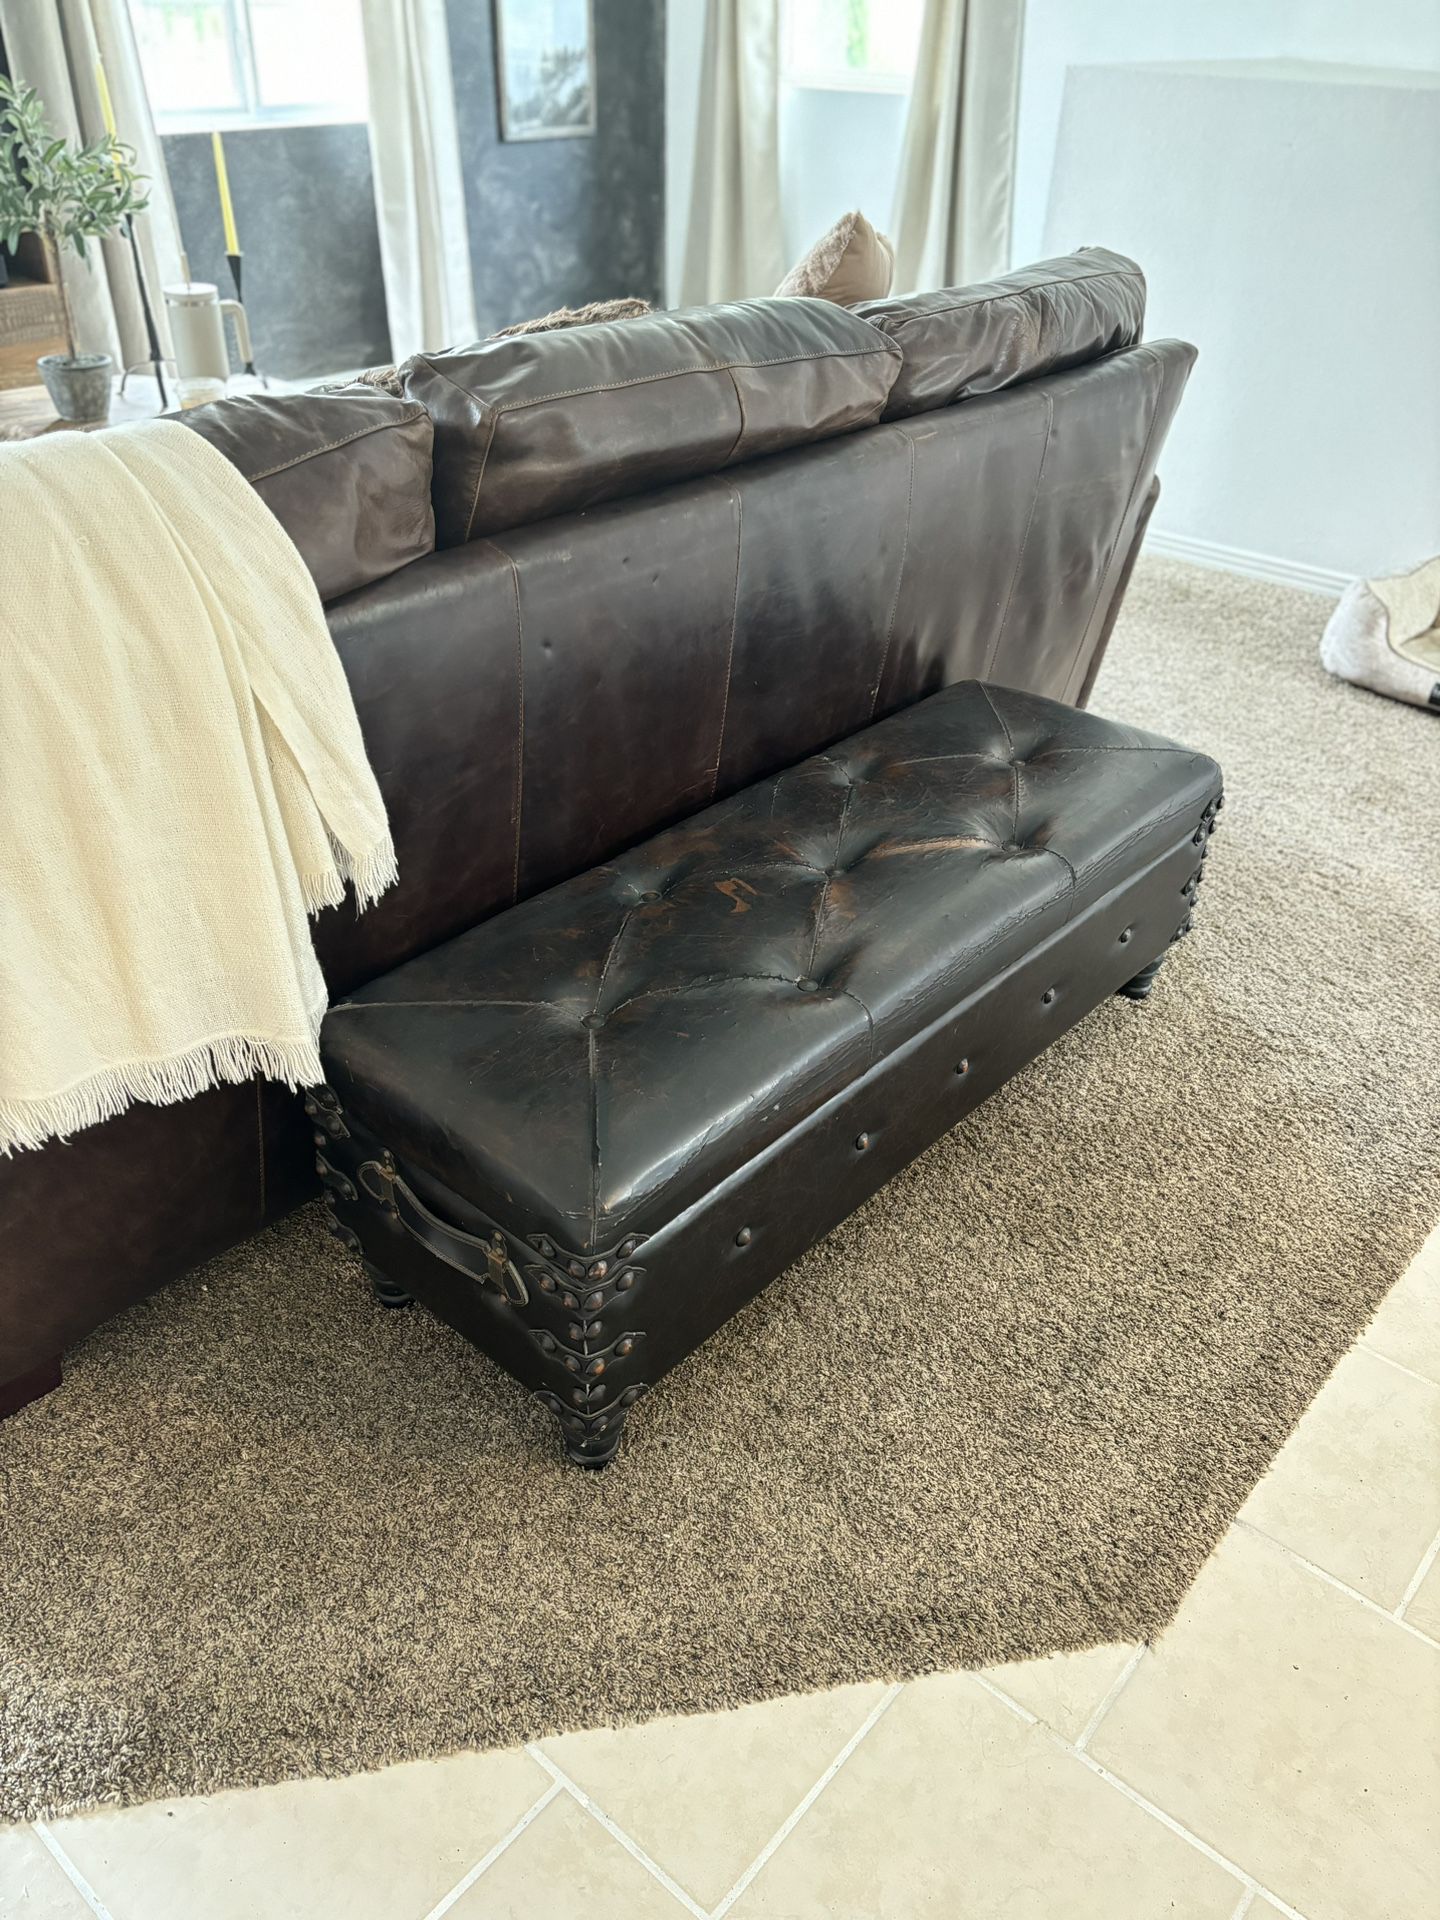  rustic ottoman bench with storage